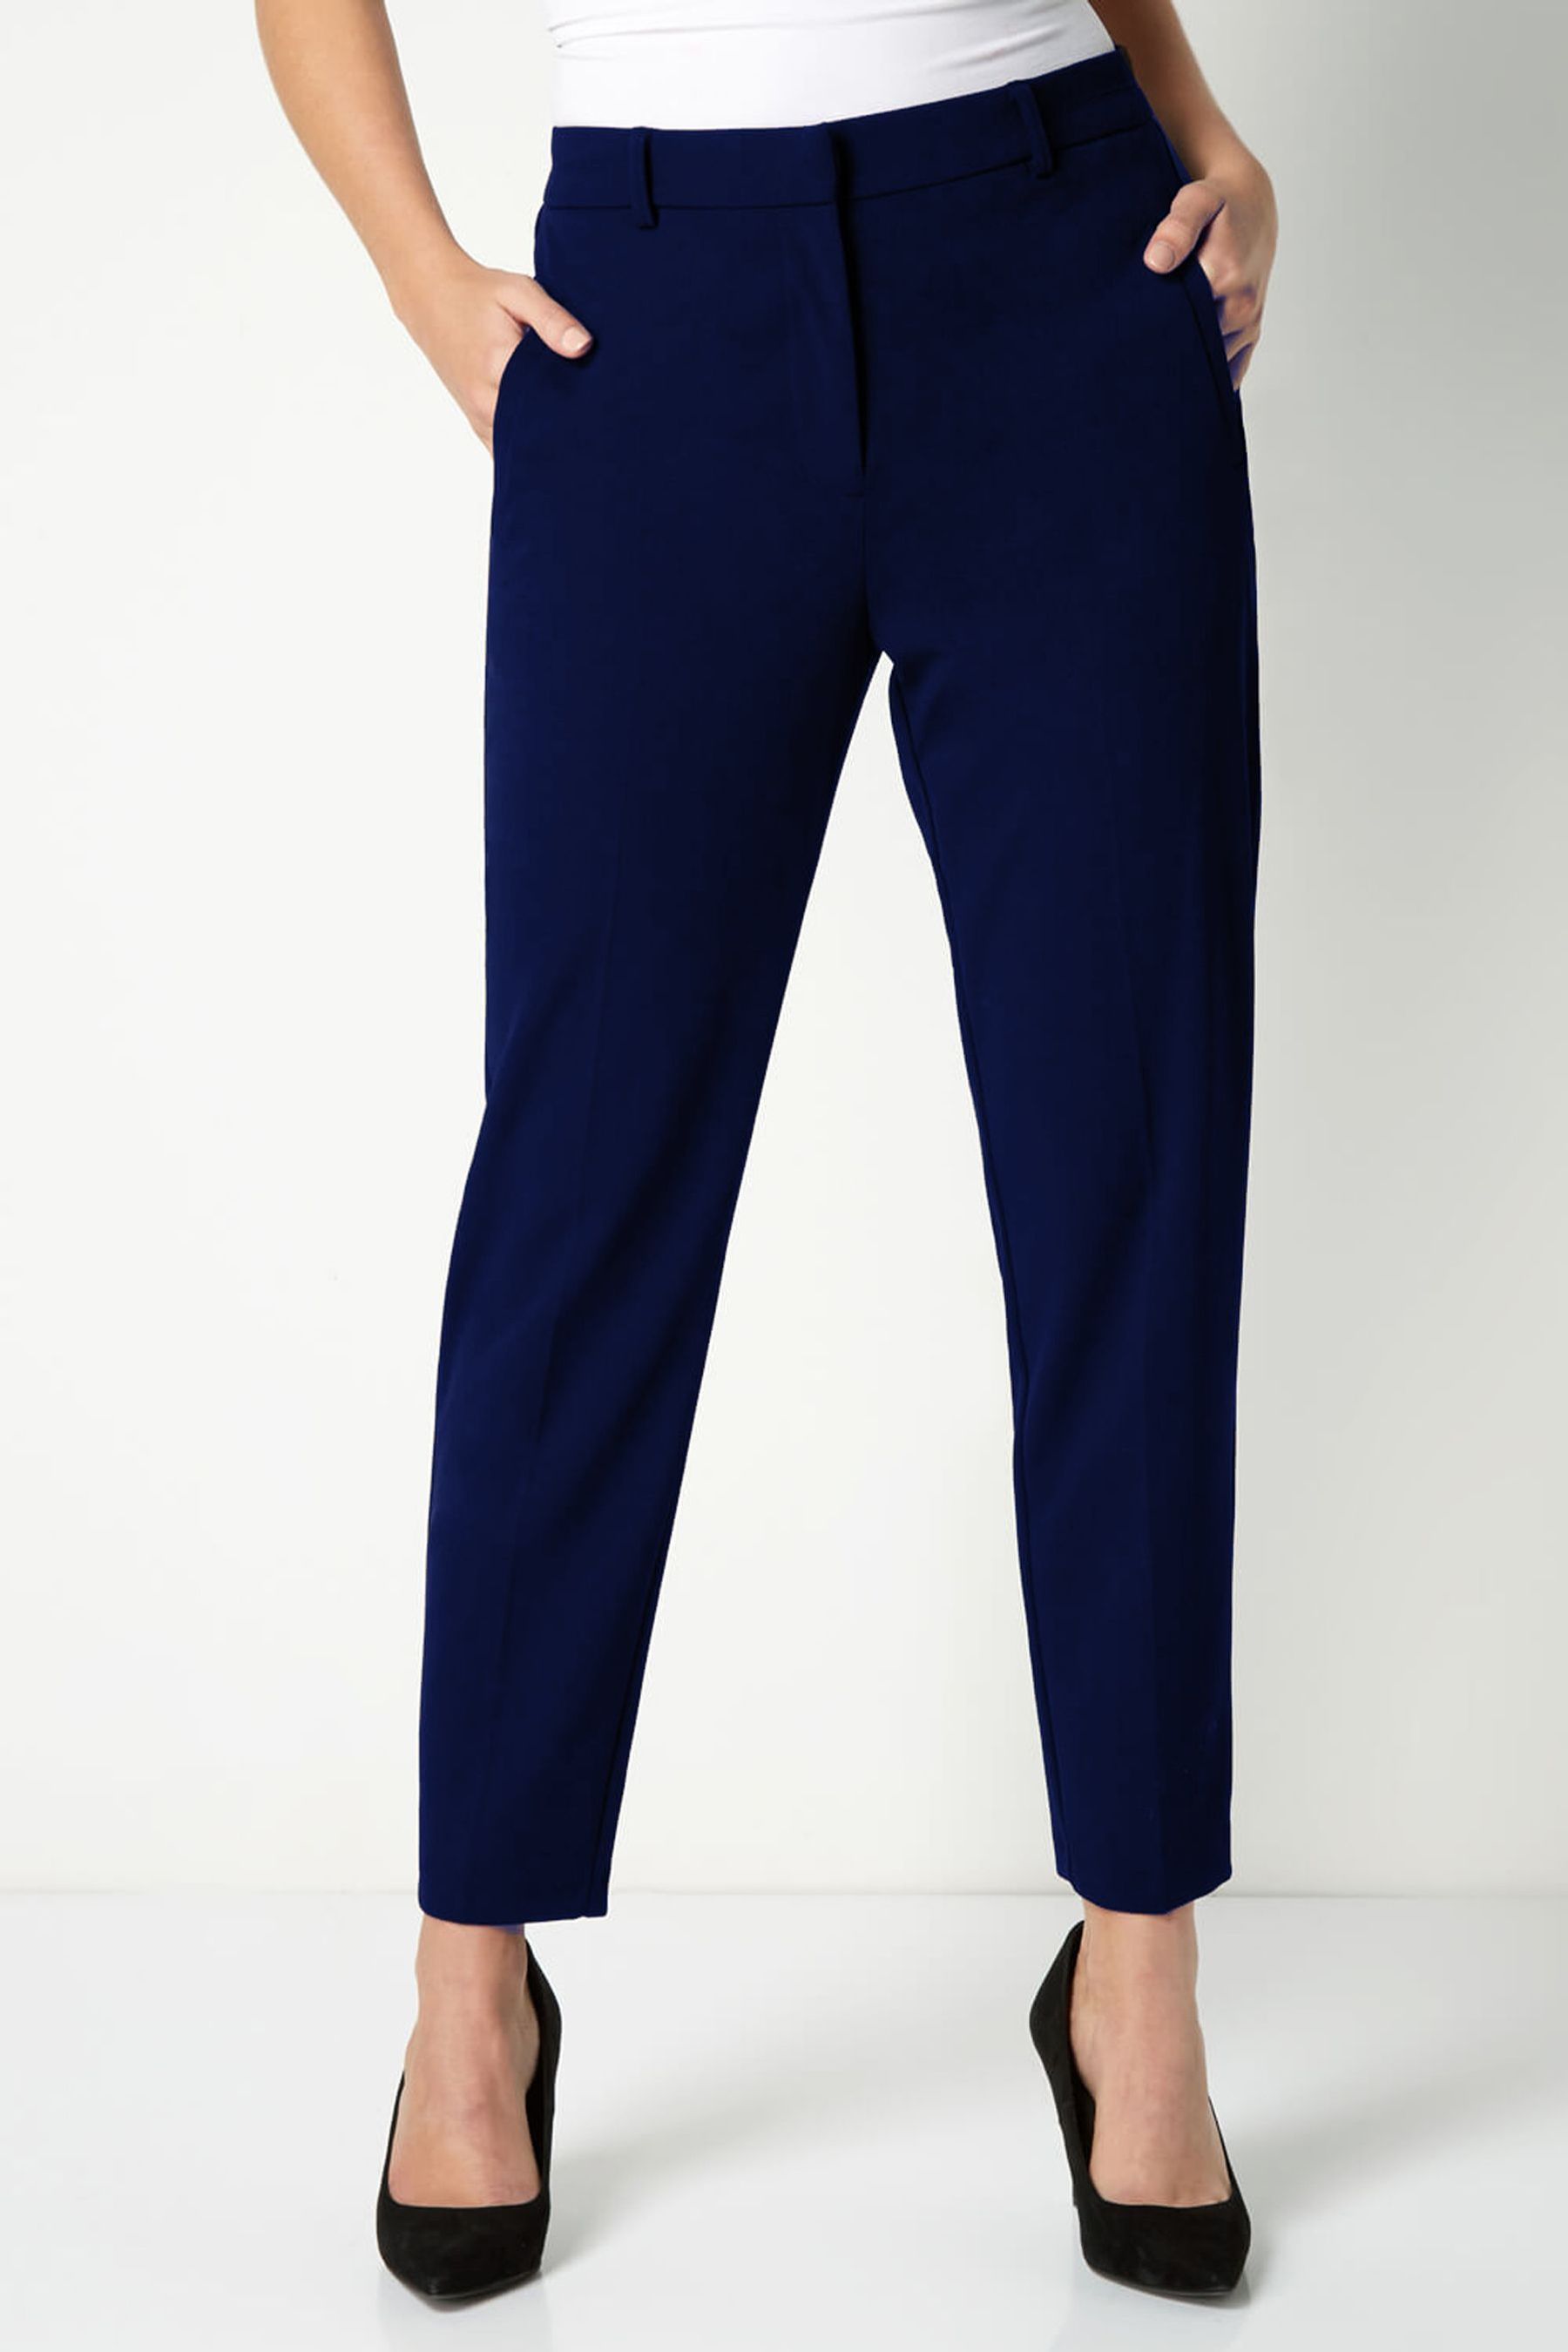 Buy Roman Navy Tall Originals Straight Leg Tapered Trouser from the ...